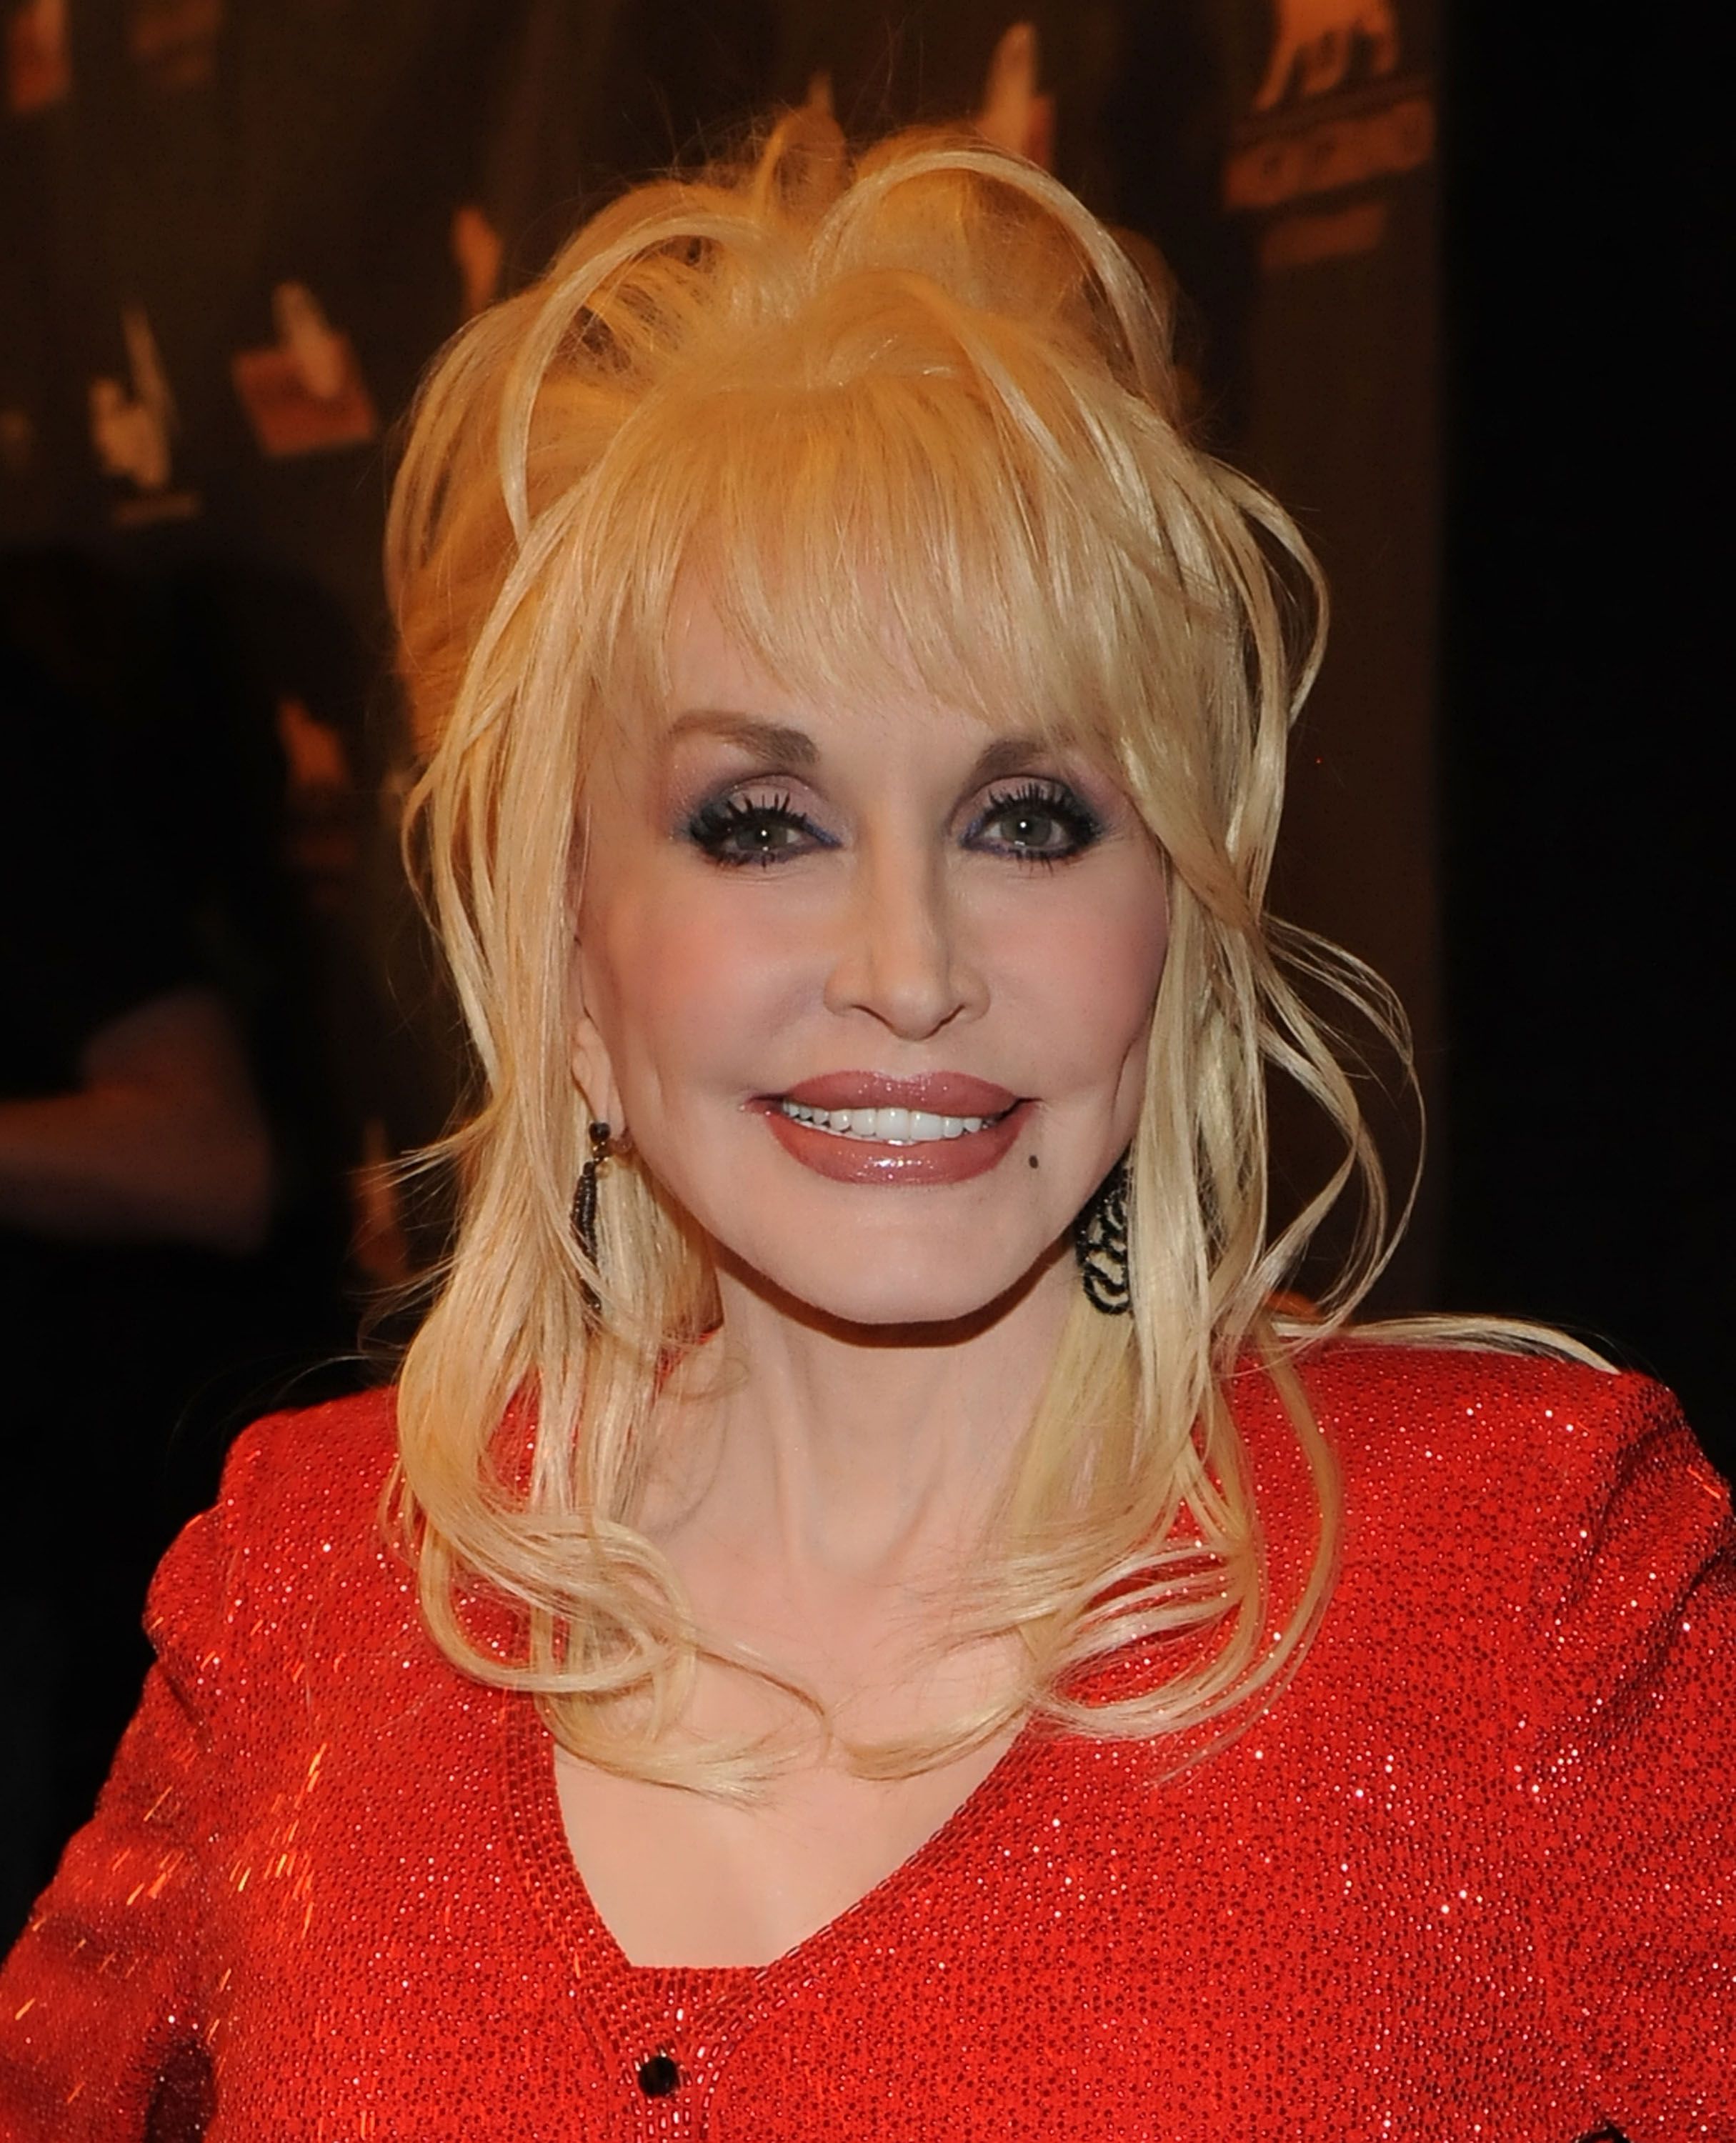 Dolly Parton at the Kenny Rogers: The First 50 Years award show at the MGM Grand at Foxwoods on April 10, 2010 in Ledyard Center, Connecticut. | Photo: Getty Images